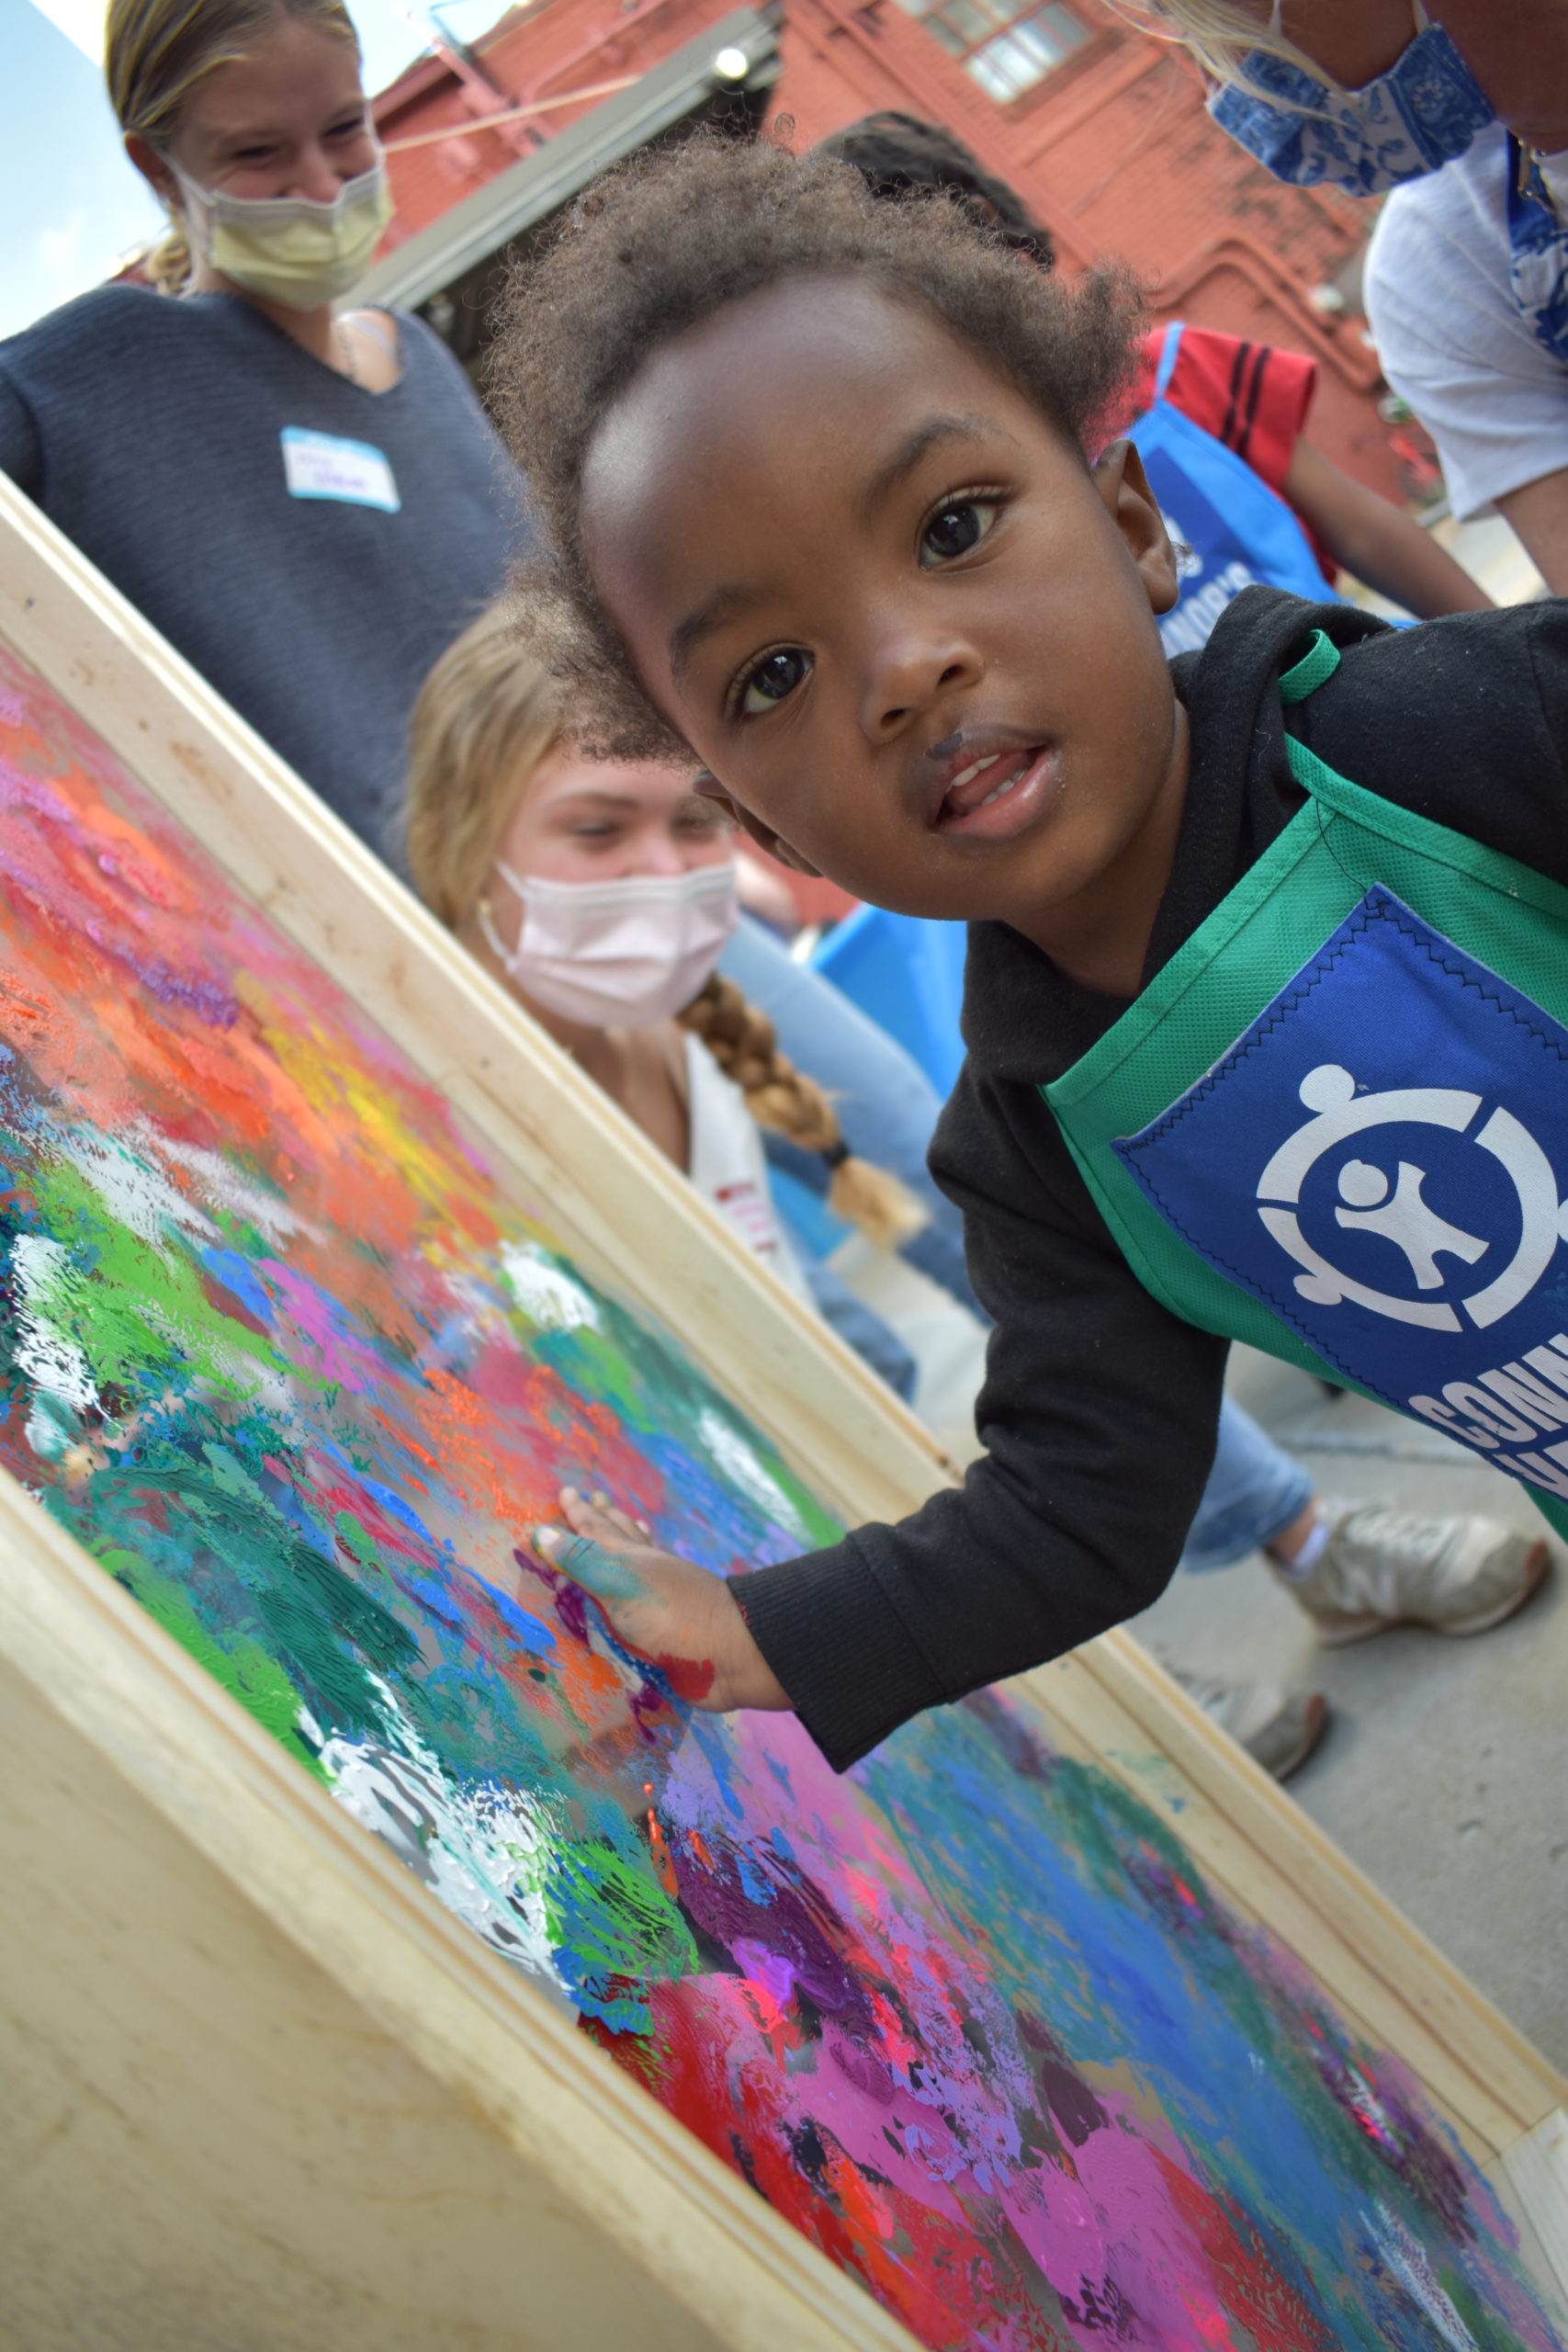 A child painting with his hands